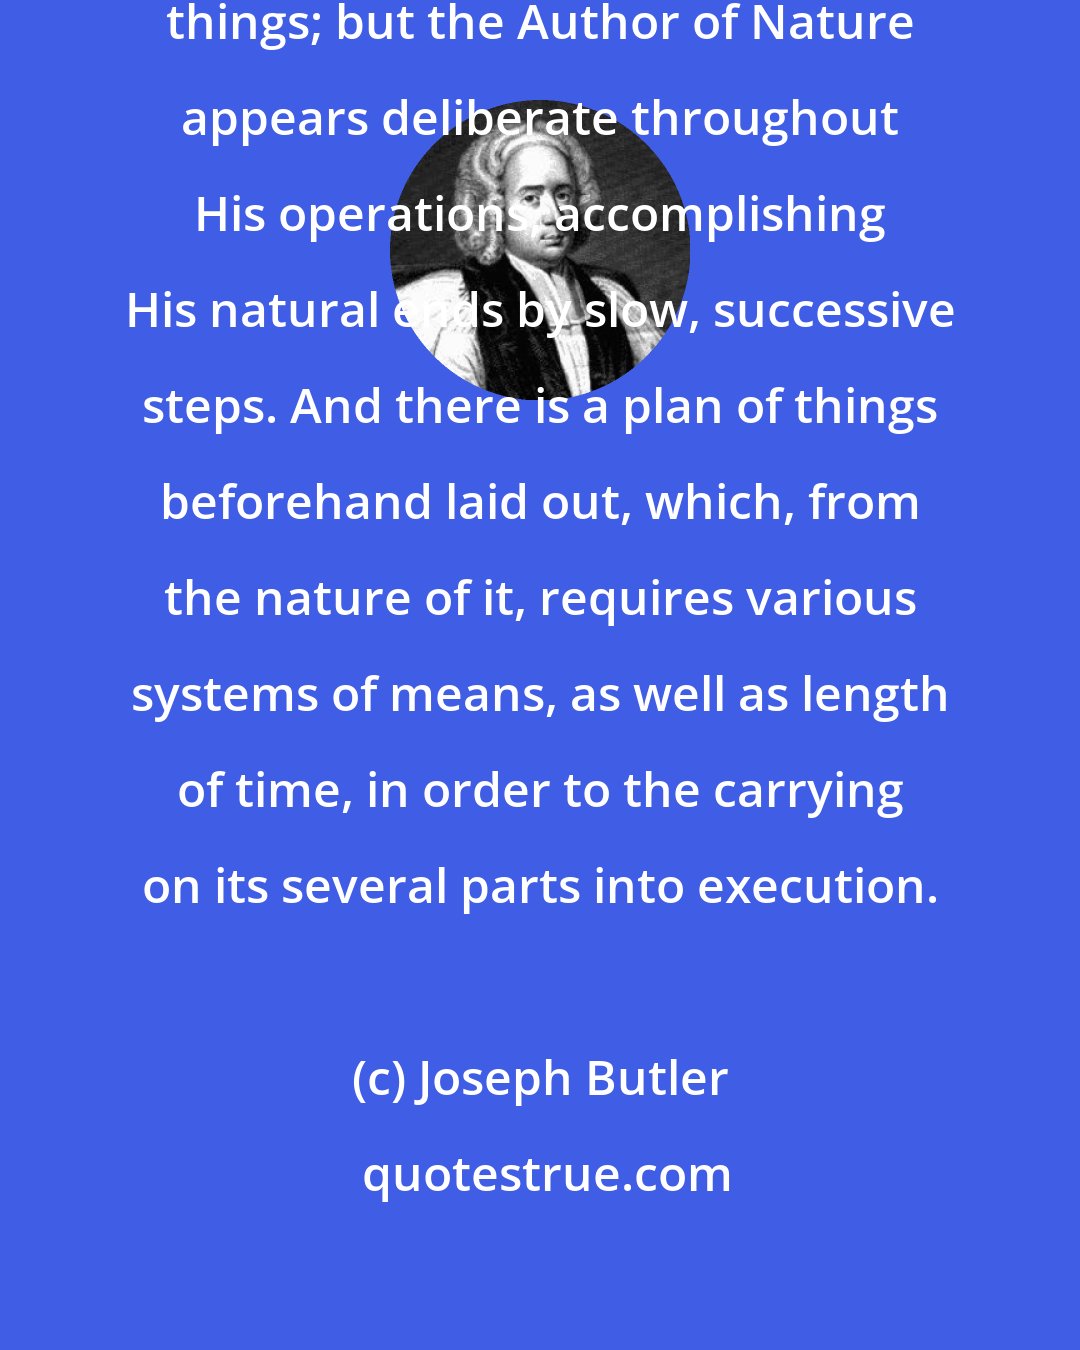 Joseph Butler: Men are impatient, and for precipitating things; but the Author of Nature appears deliberate throughout His operations, accomplishing His natural ends by slow, successive steps. And there is a plan of things beforehand laid out, which, from the nature of it, requires various systems of means, as well as length of time, in order to the carrying on its several parts into execution.